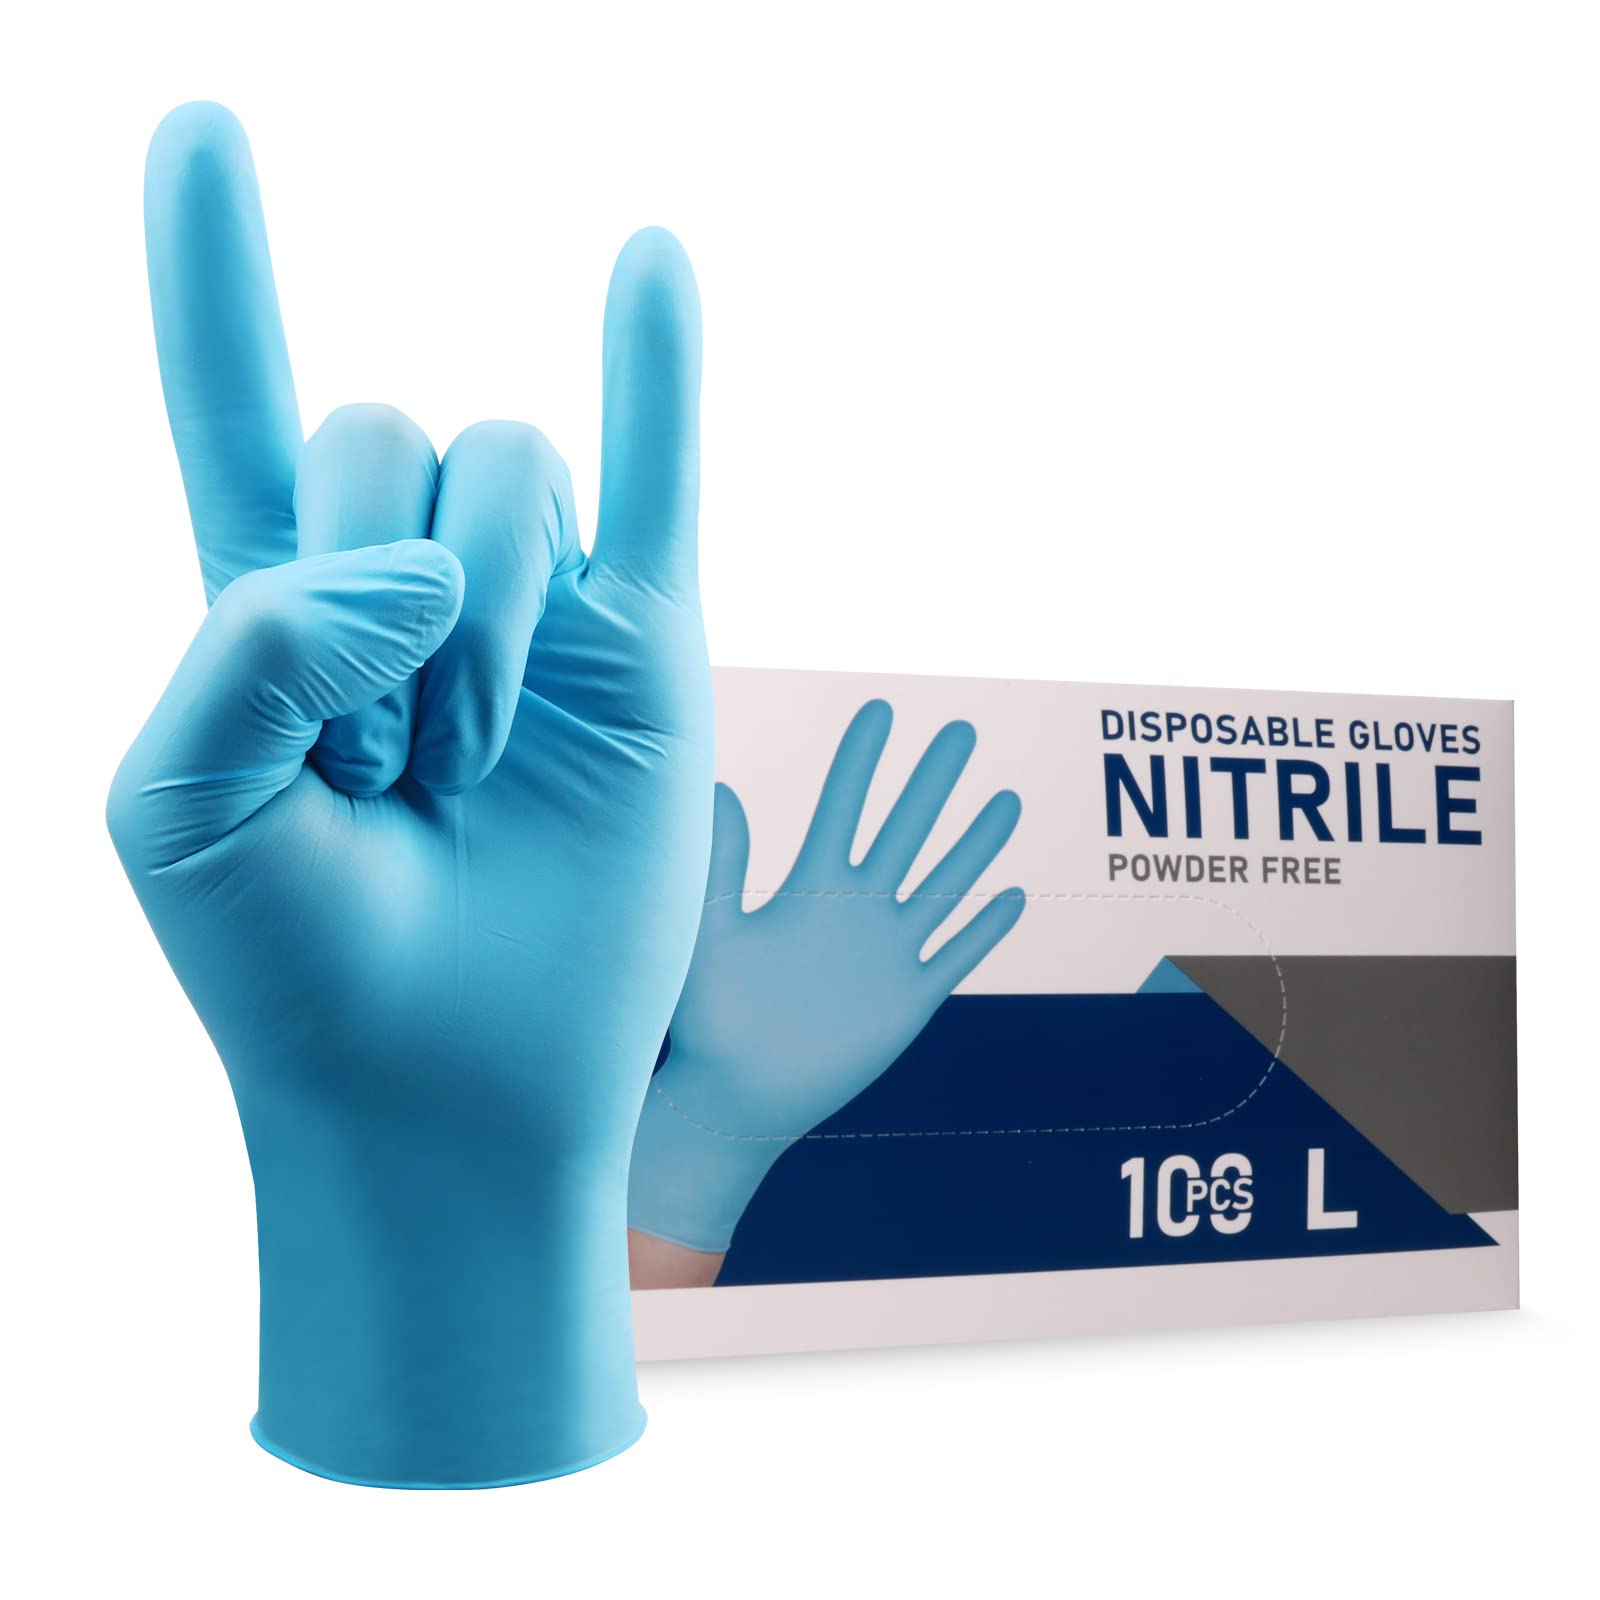 Wostar Nitrile Disposable Gloves Powder & Latex Free 4mil Touch Screen Disposable Non-Sterile Nitrile Exam Gloves